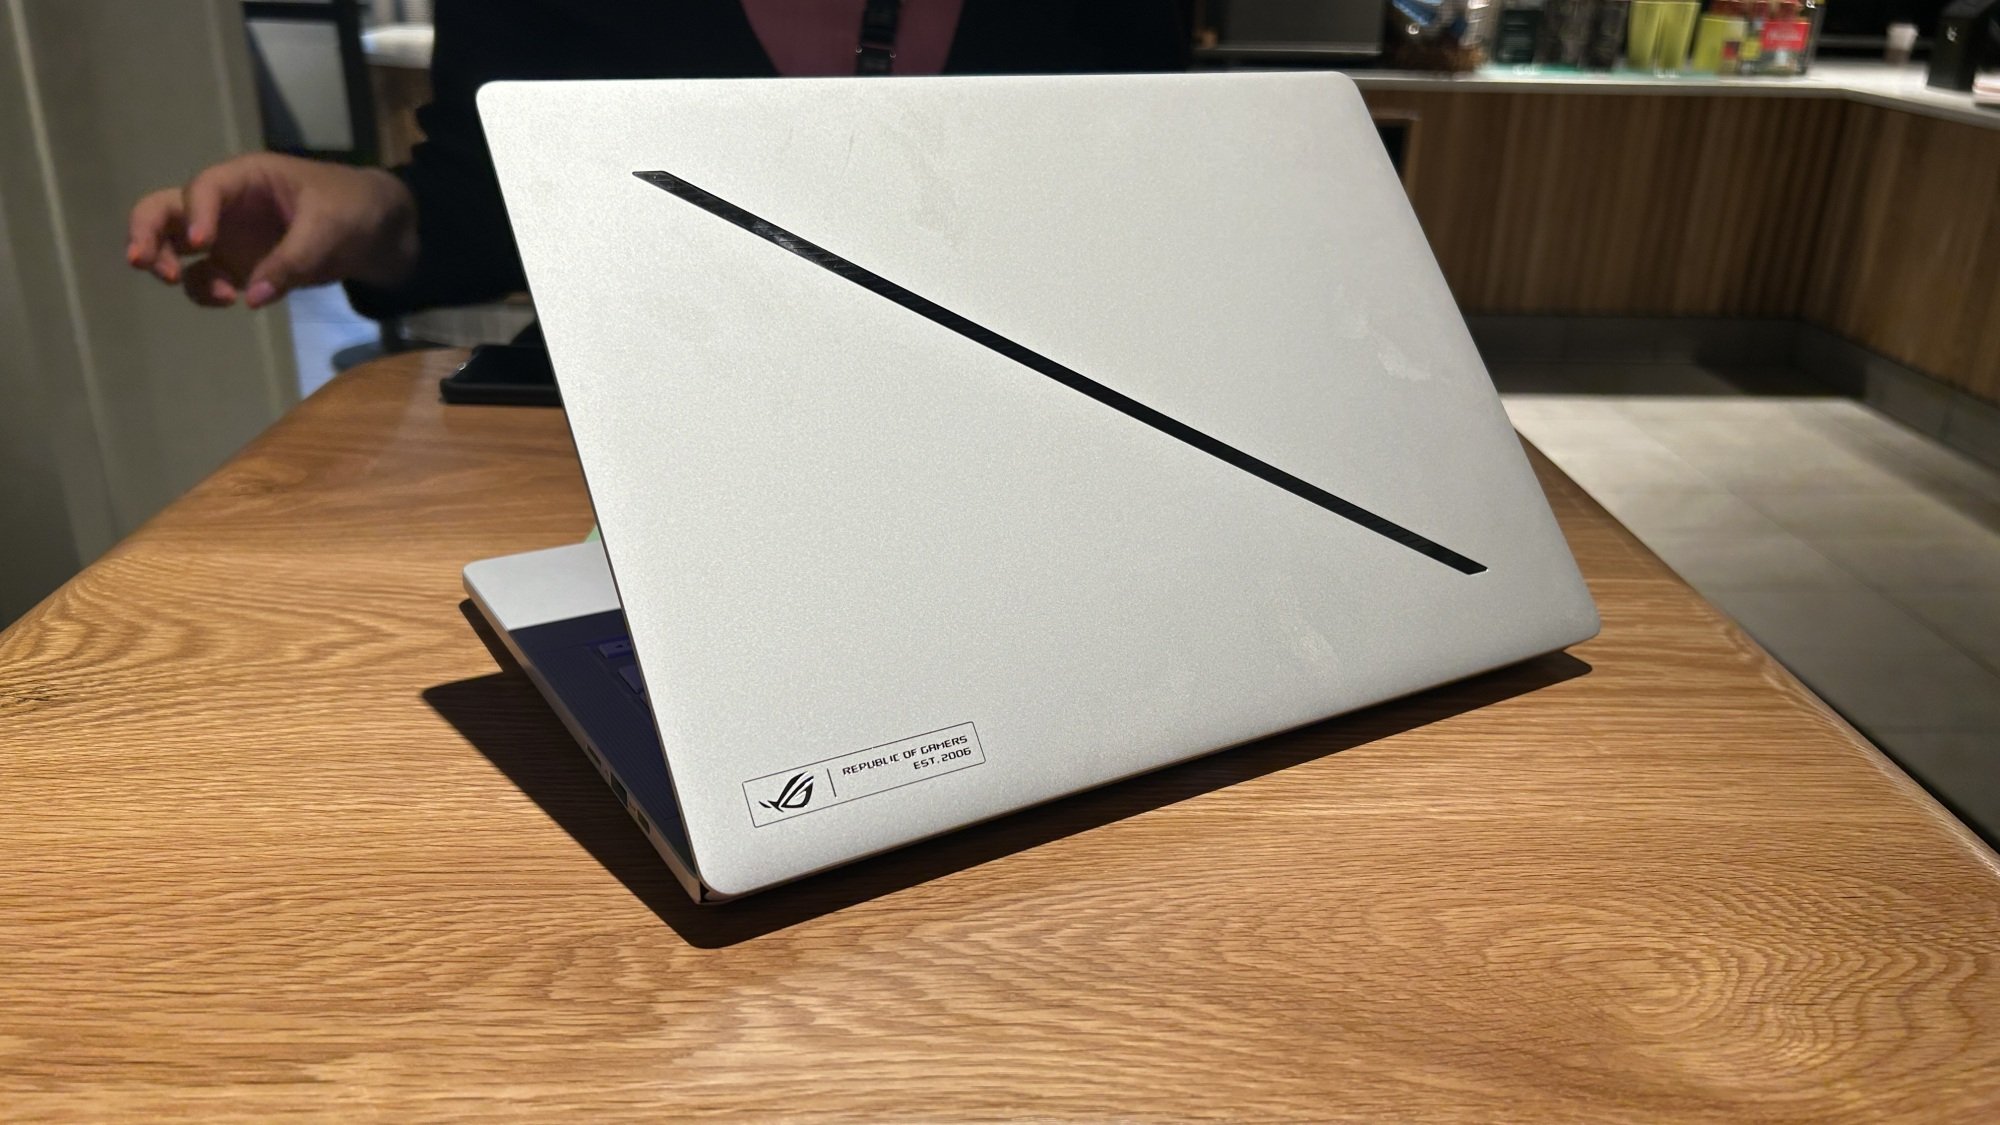 Asus ROG Zephyrus G14 on a table